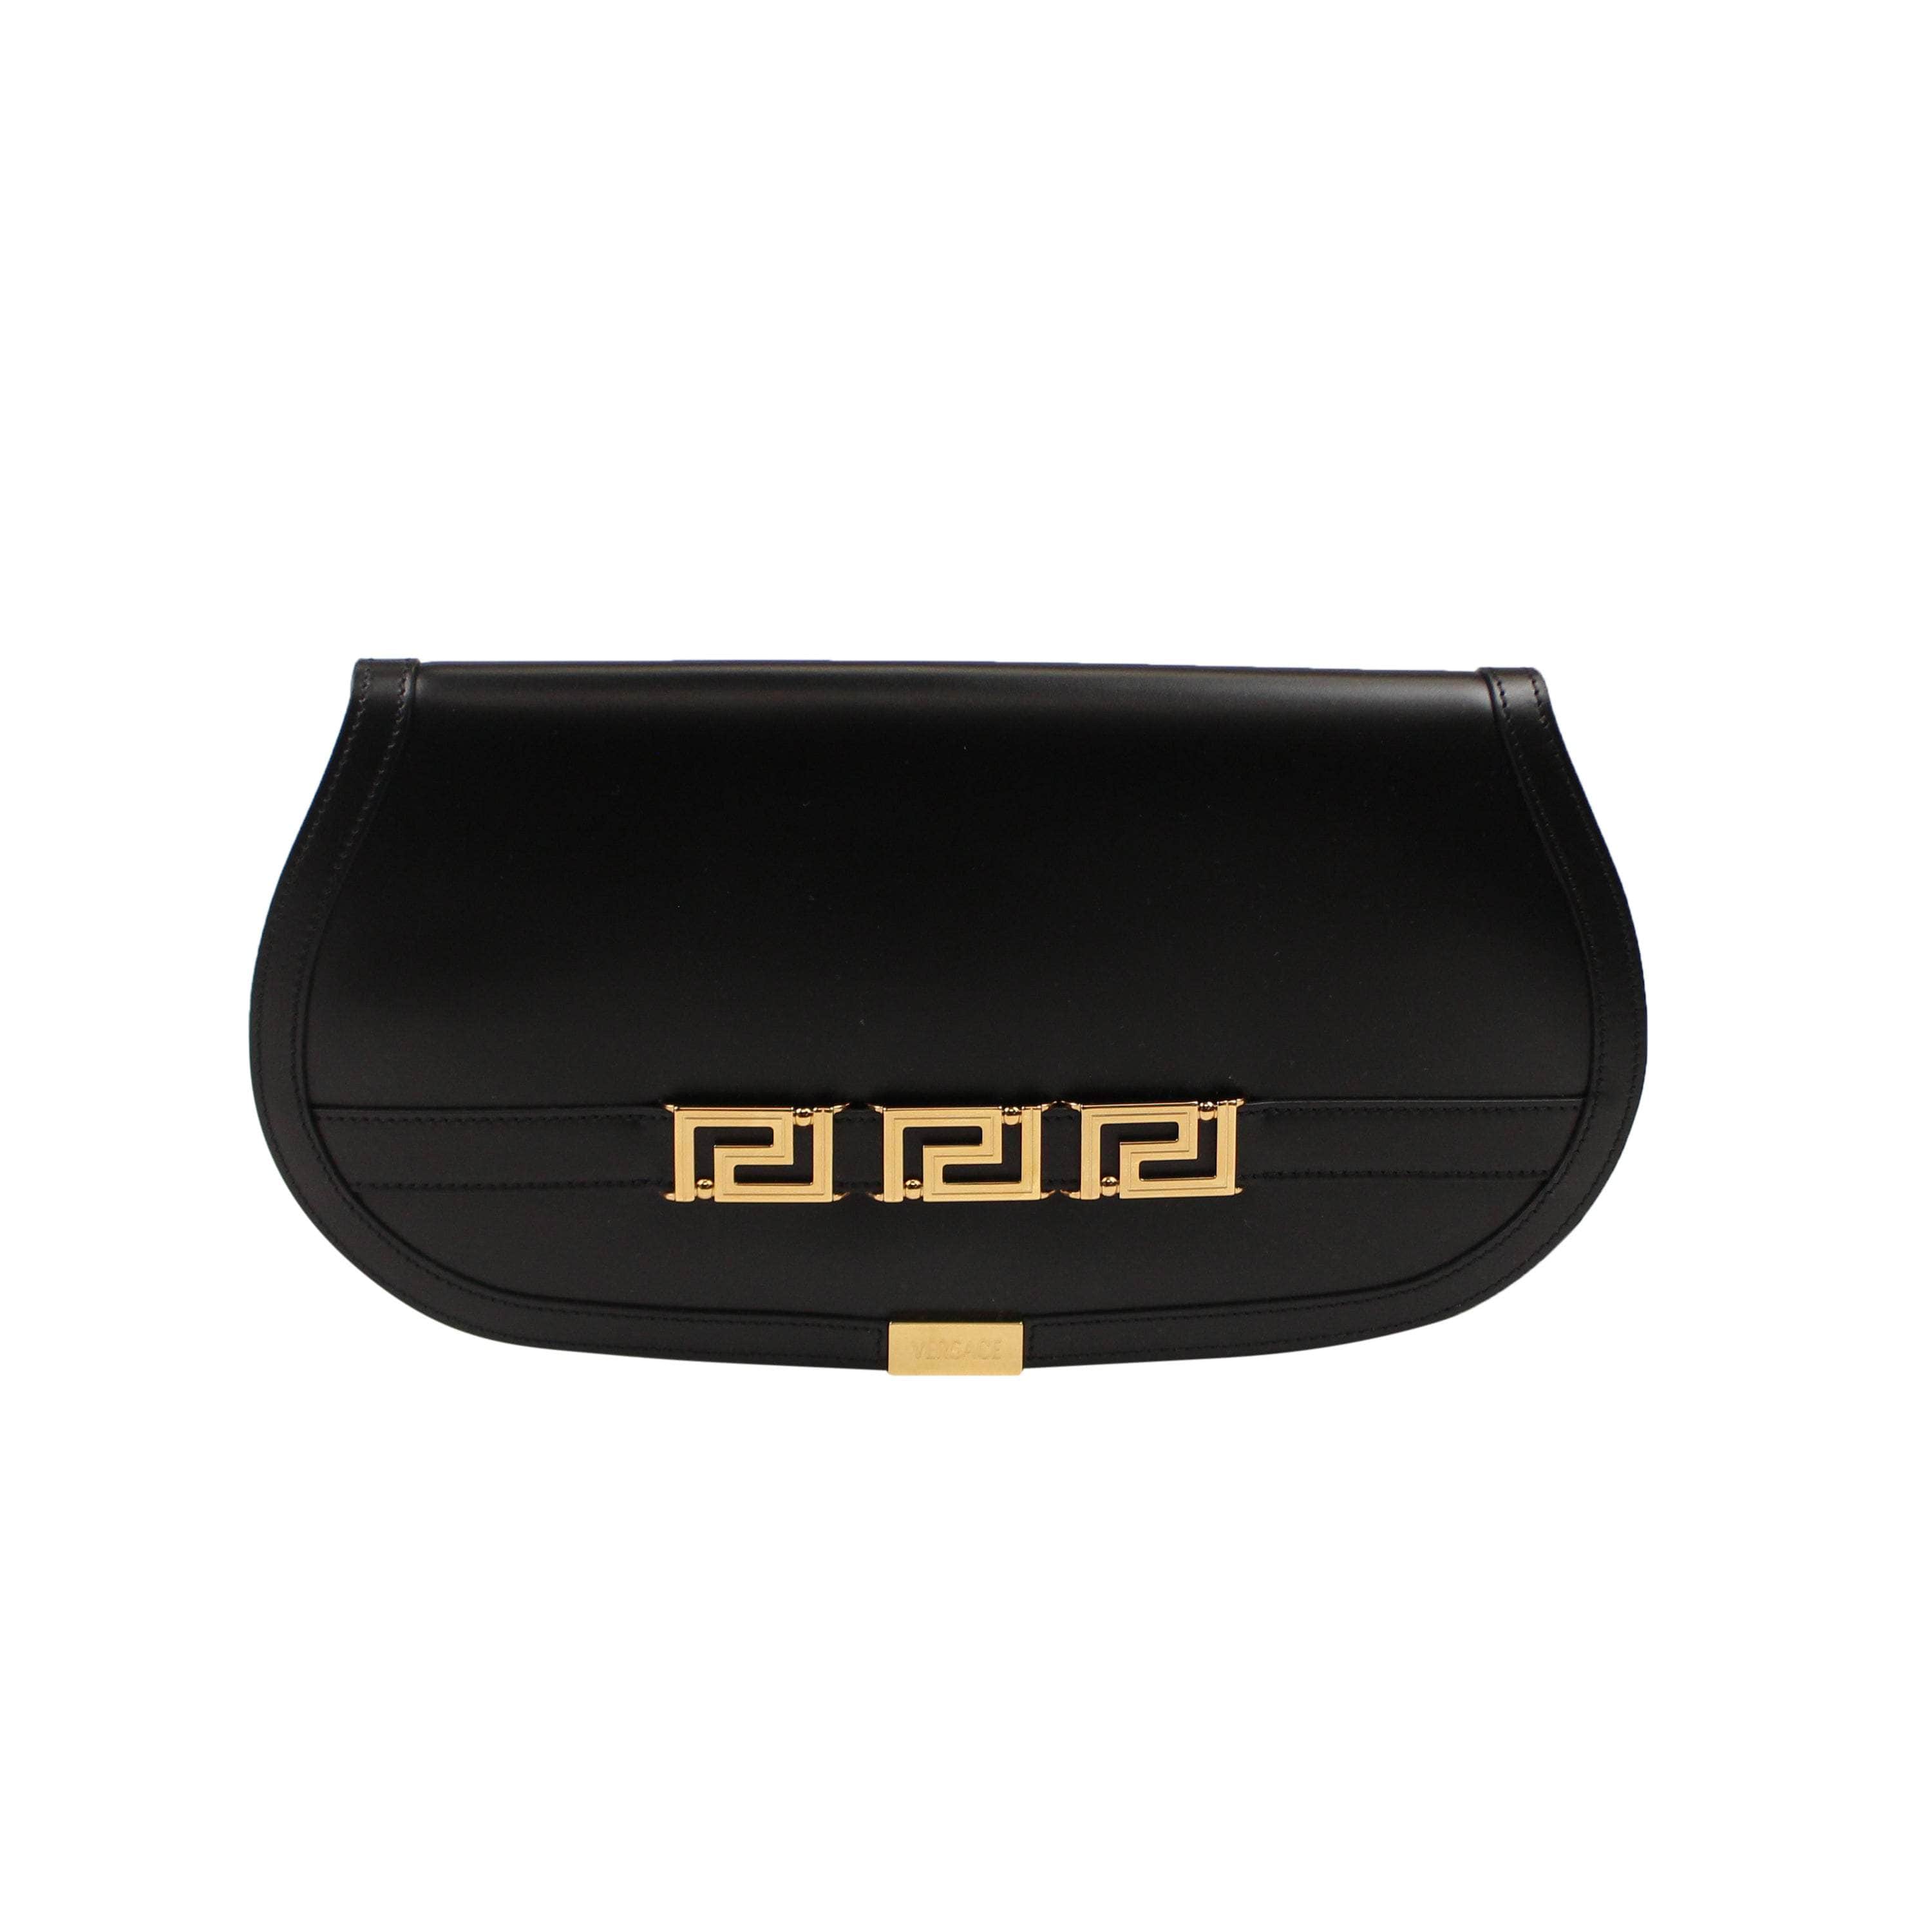 Versace 1000-2000, channelenable-all, chicmi, couponcollection, main-accessories, shop375, Stadium Goods, stadiumgoods, versace, womens-shoulder-bags OS Goddess Clutch Bag Black VRS-XACC-0002/OS VRS-XACC-0002/OS